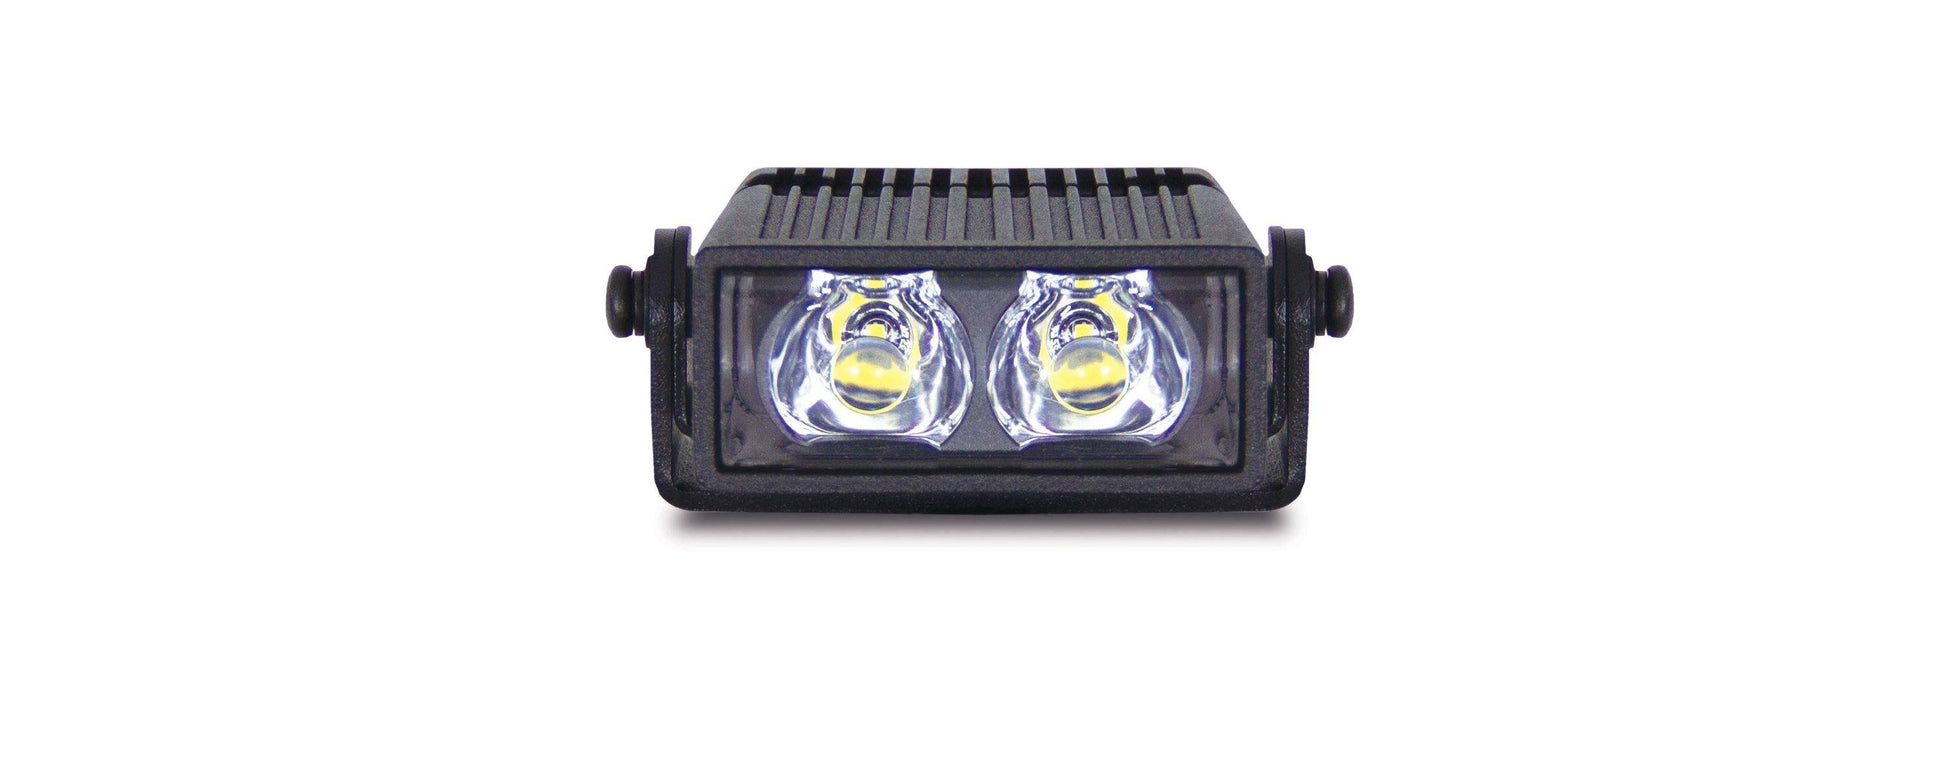 MPower ORV 2x1 Silicone Lens LED Lights - Mid-Atlantic Off-Roading